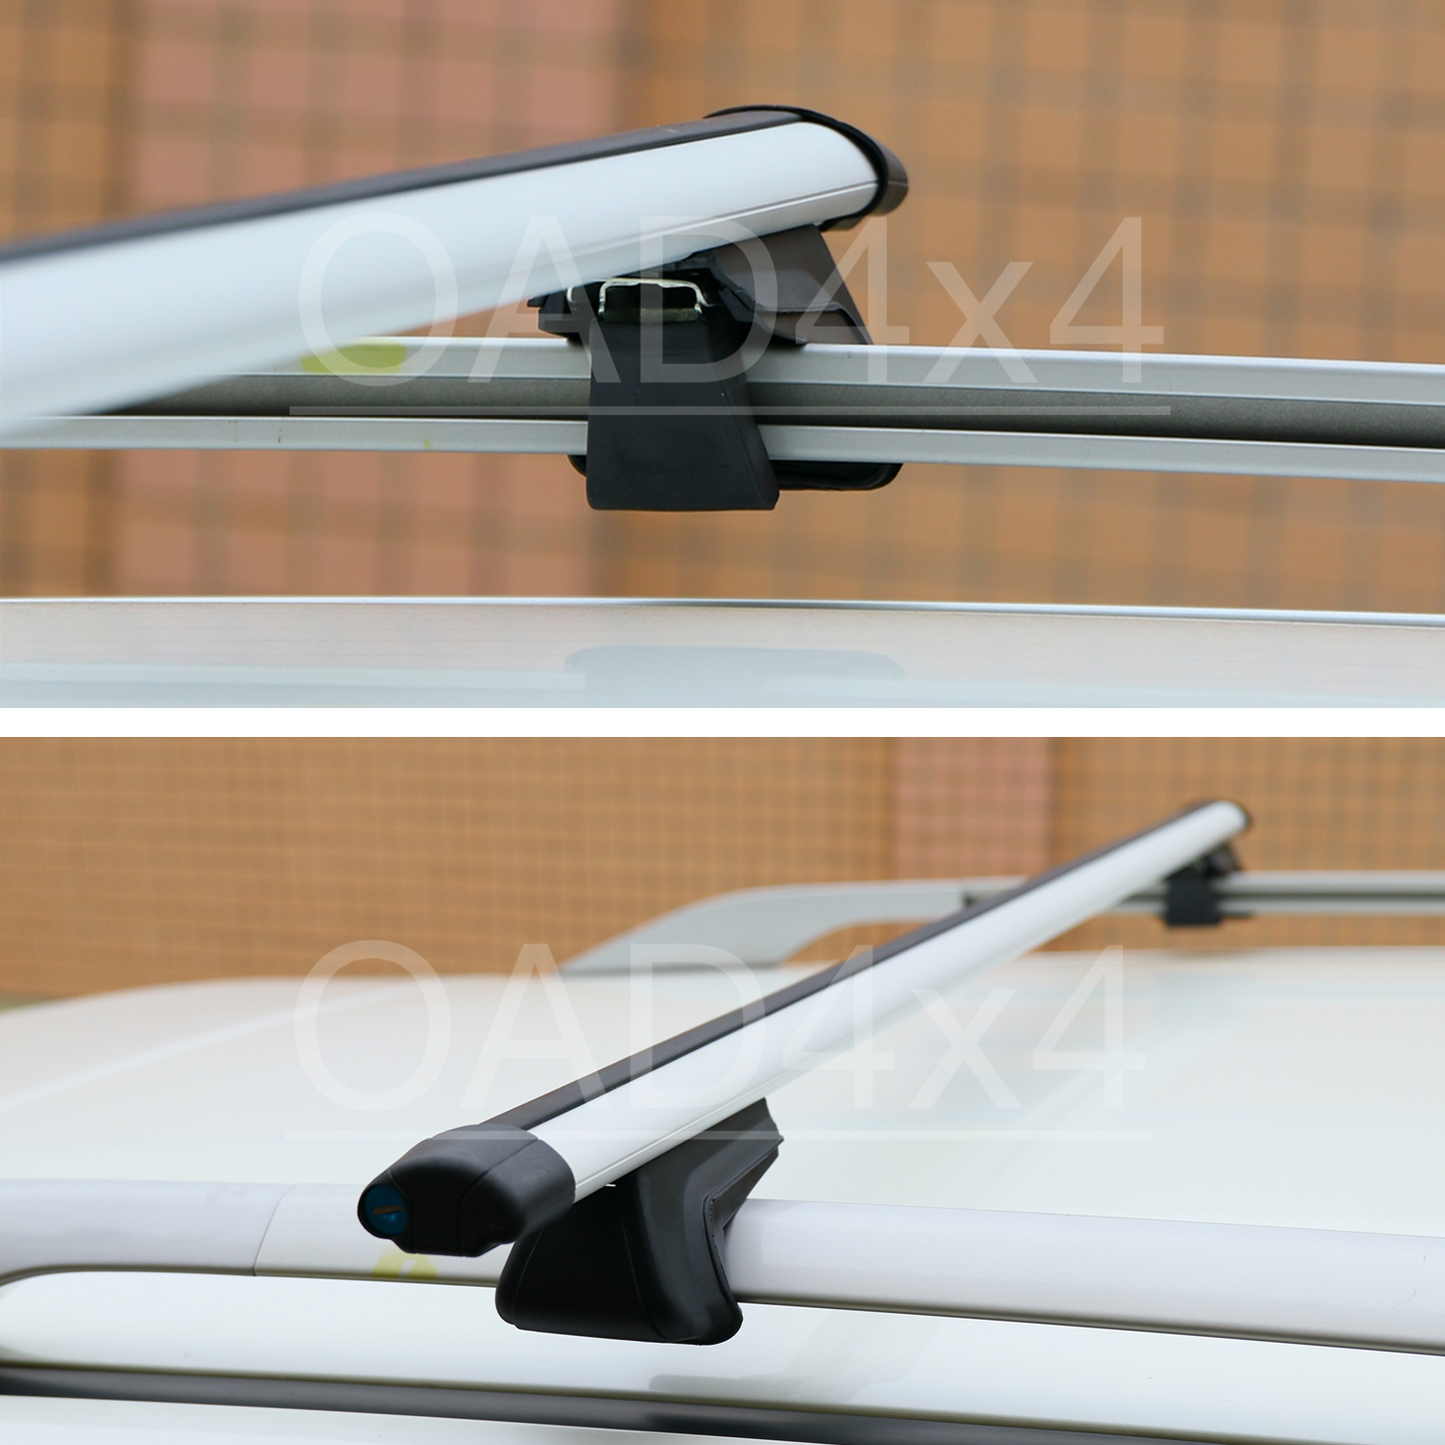 OAD 1 Pair Aluminum Silver Cross Bar Roof Racks Baggage holder for KIA Grand carnival 99-06 with raised roof rail